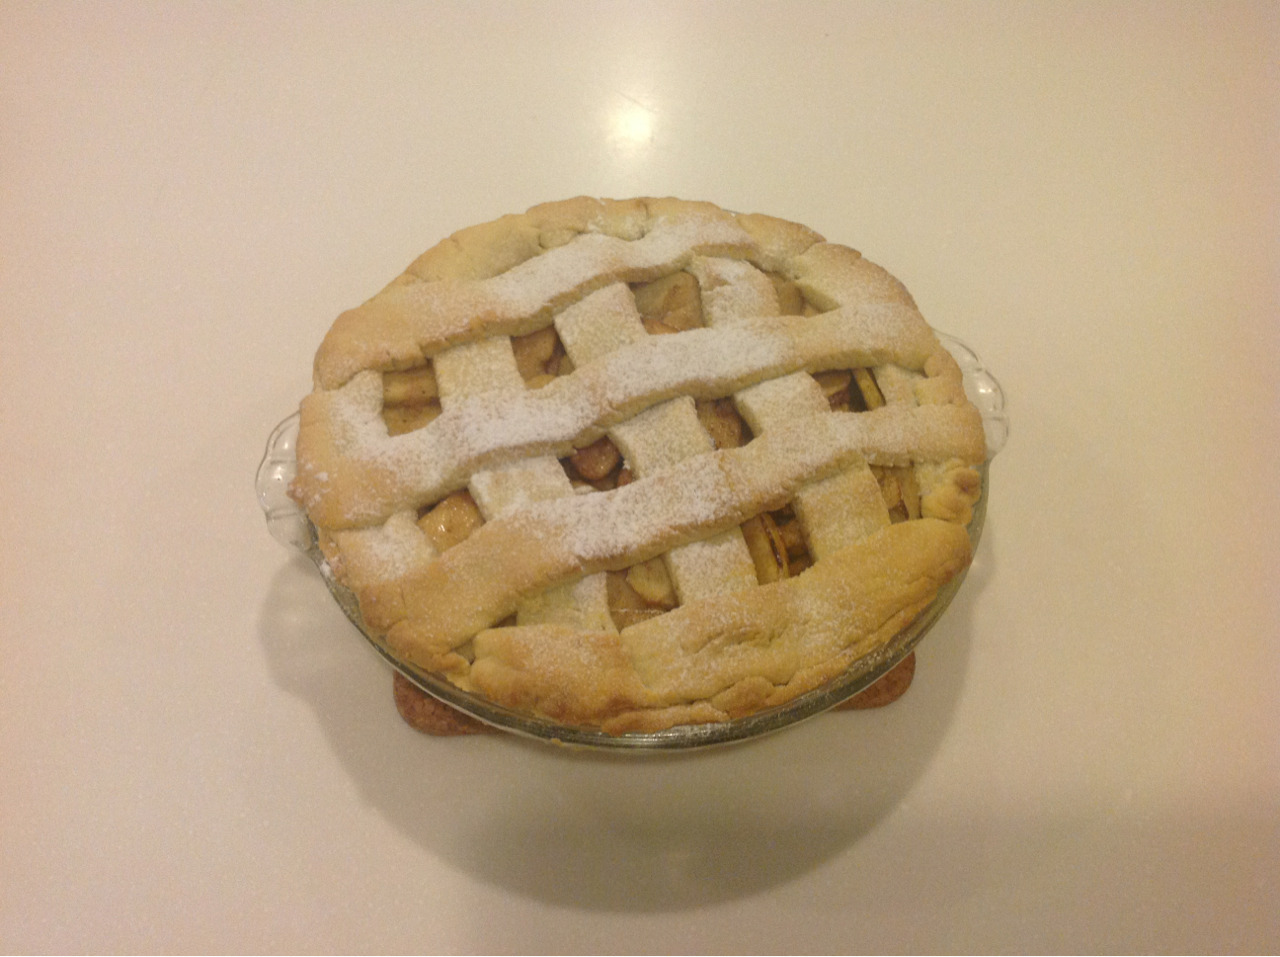 And here is my pie, pre-cut.